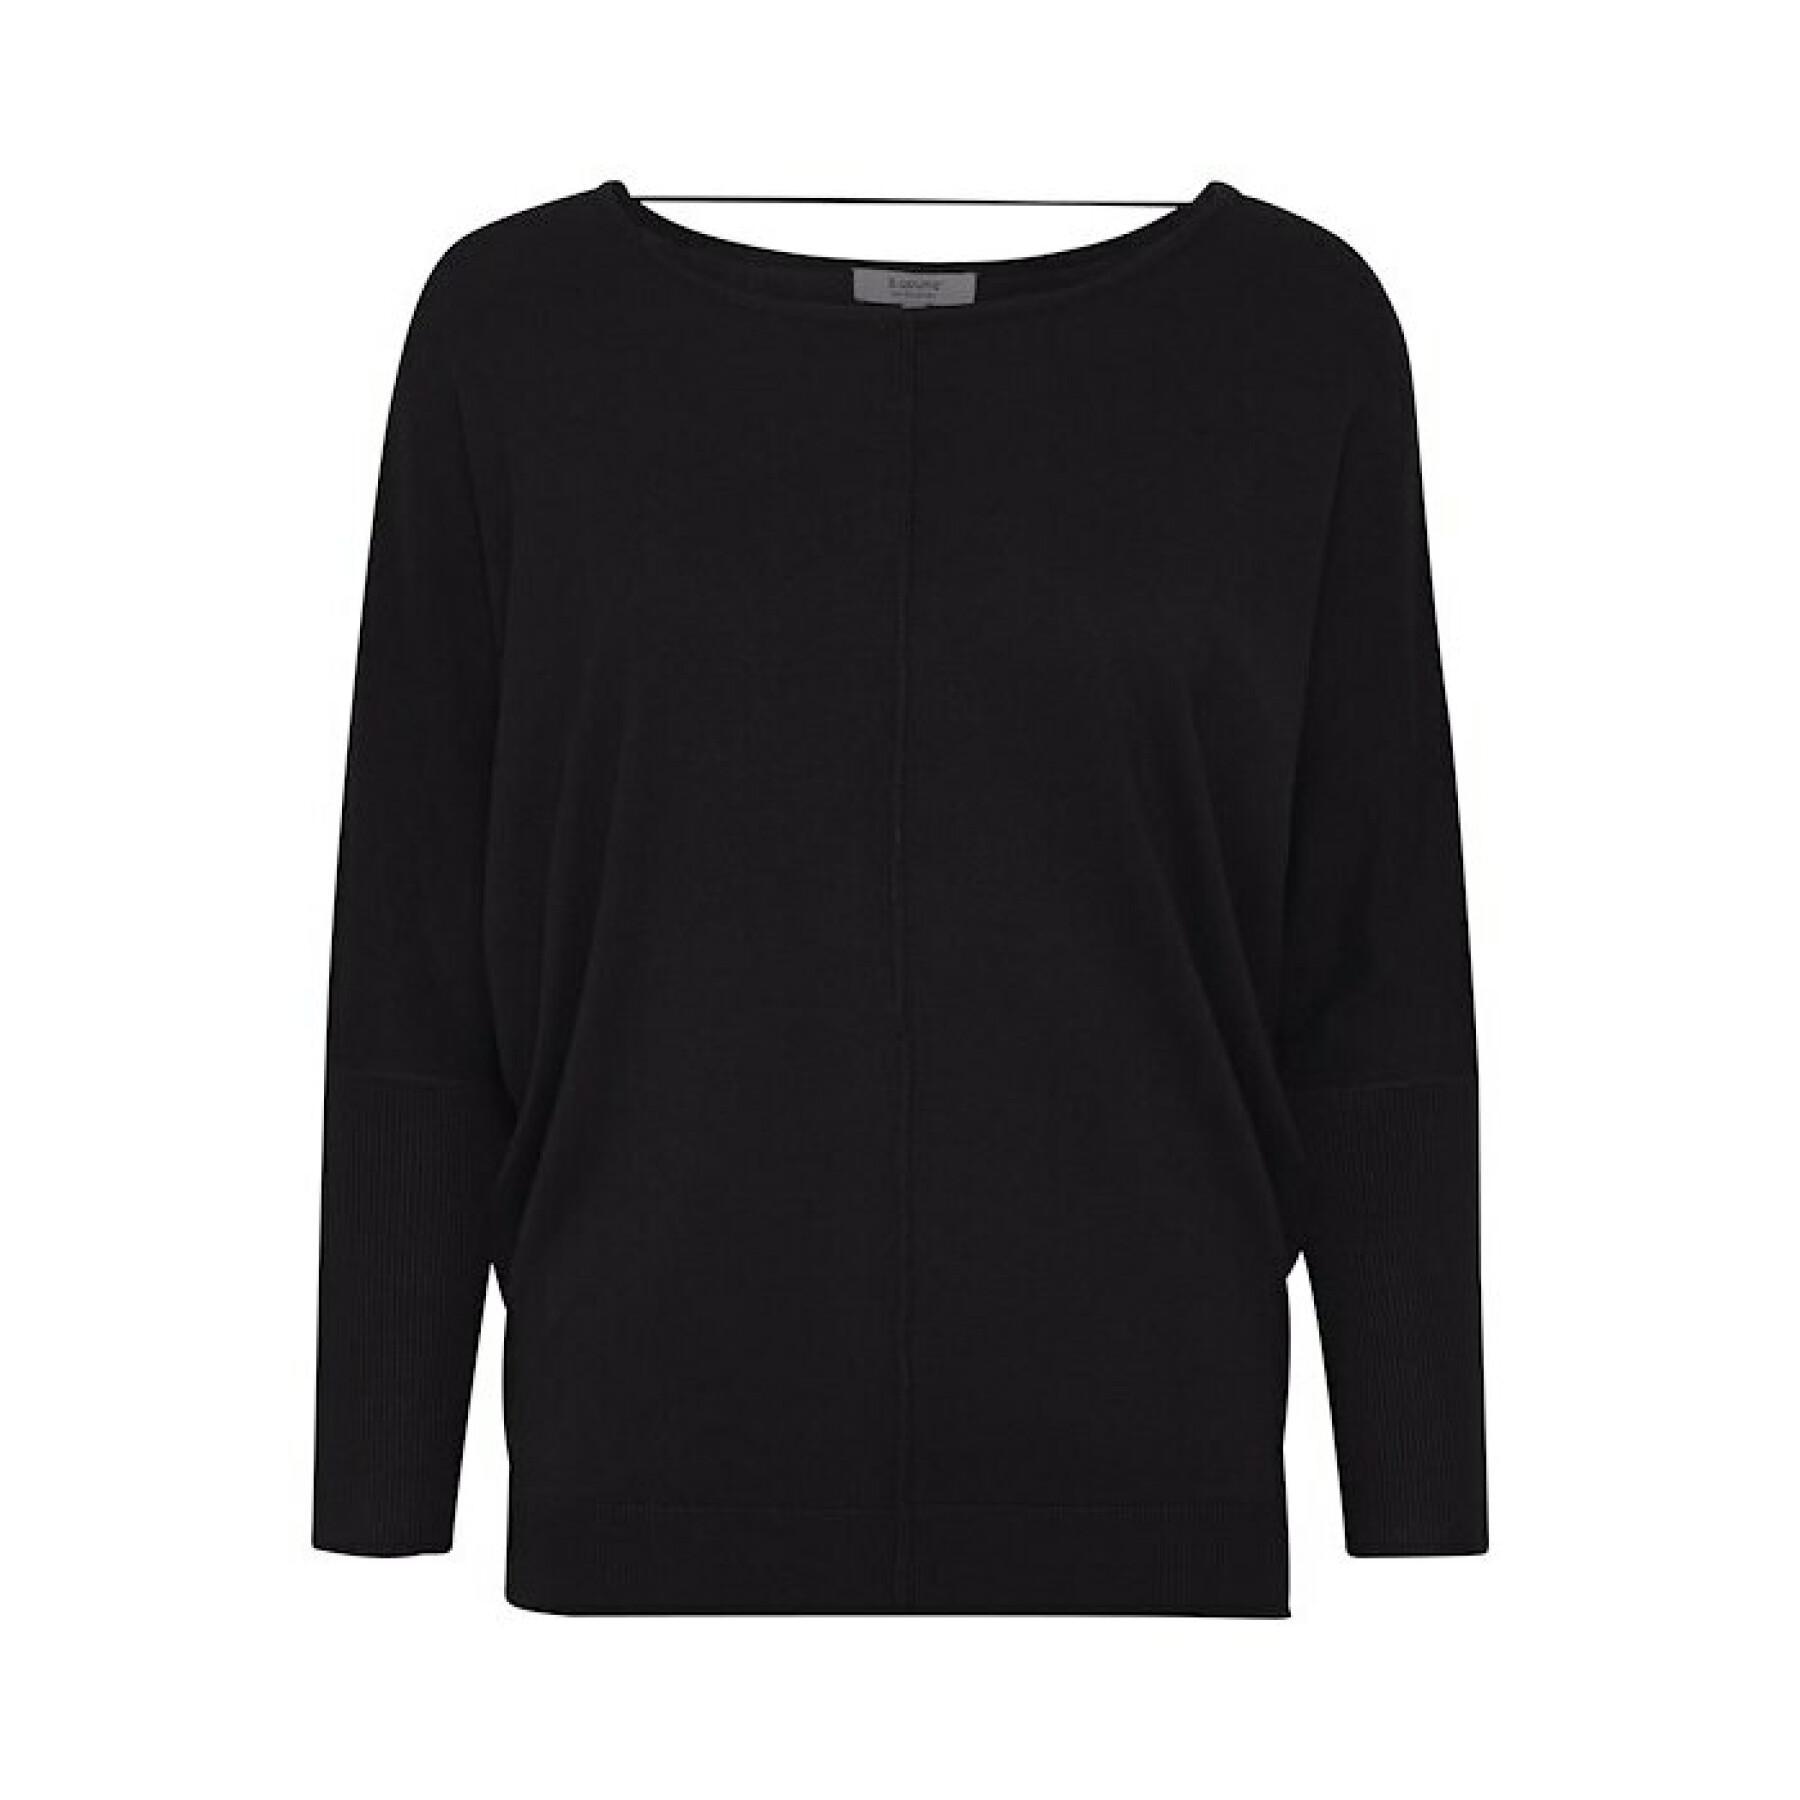 Pull tricot femme b.young bypimba